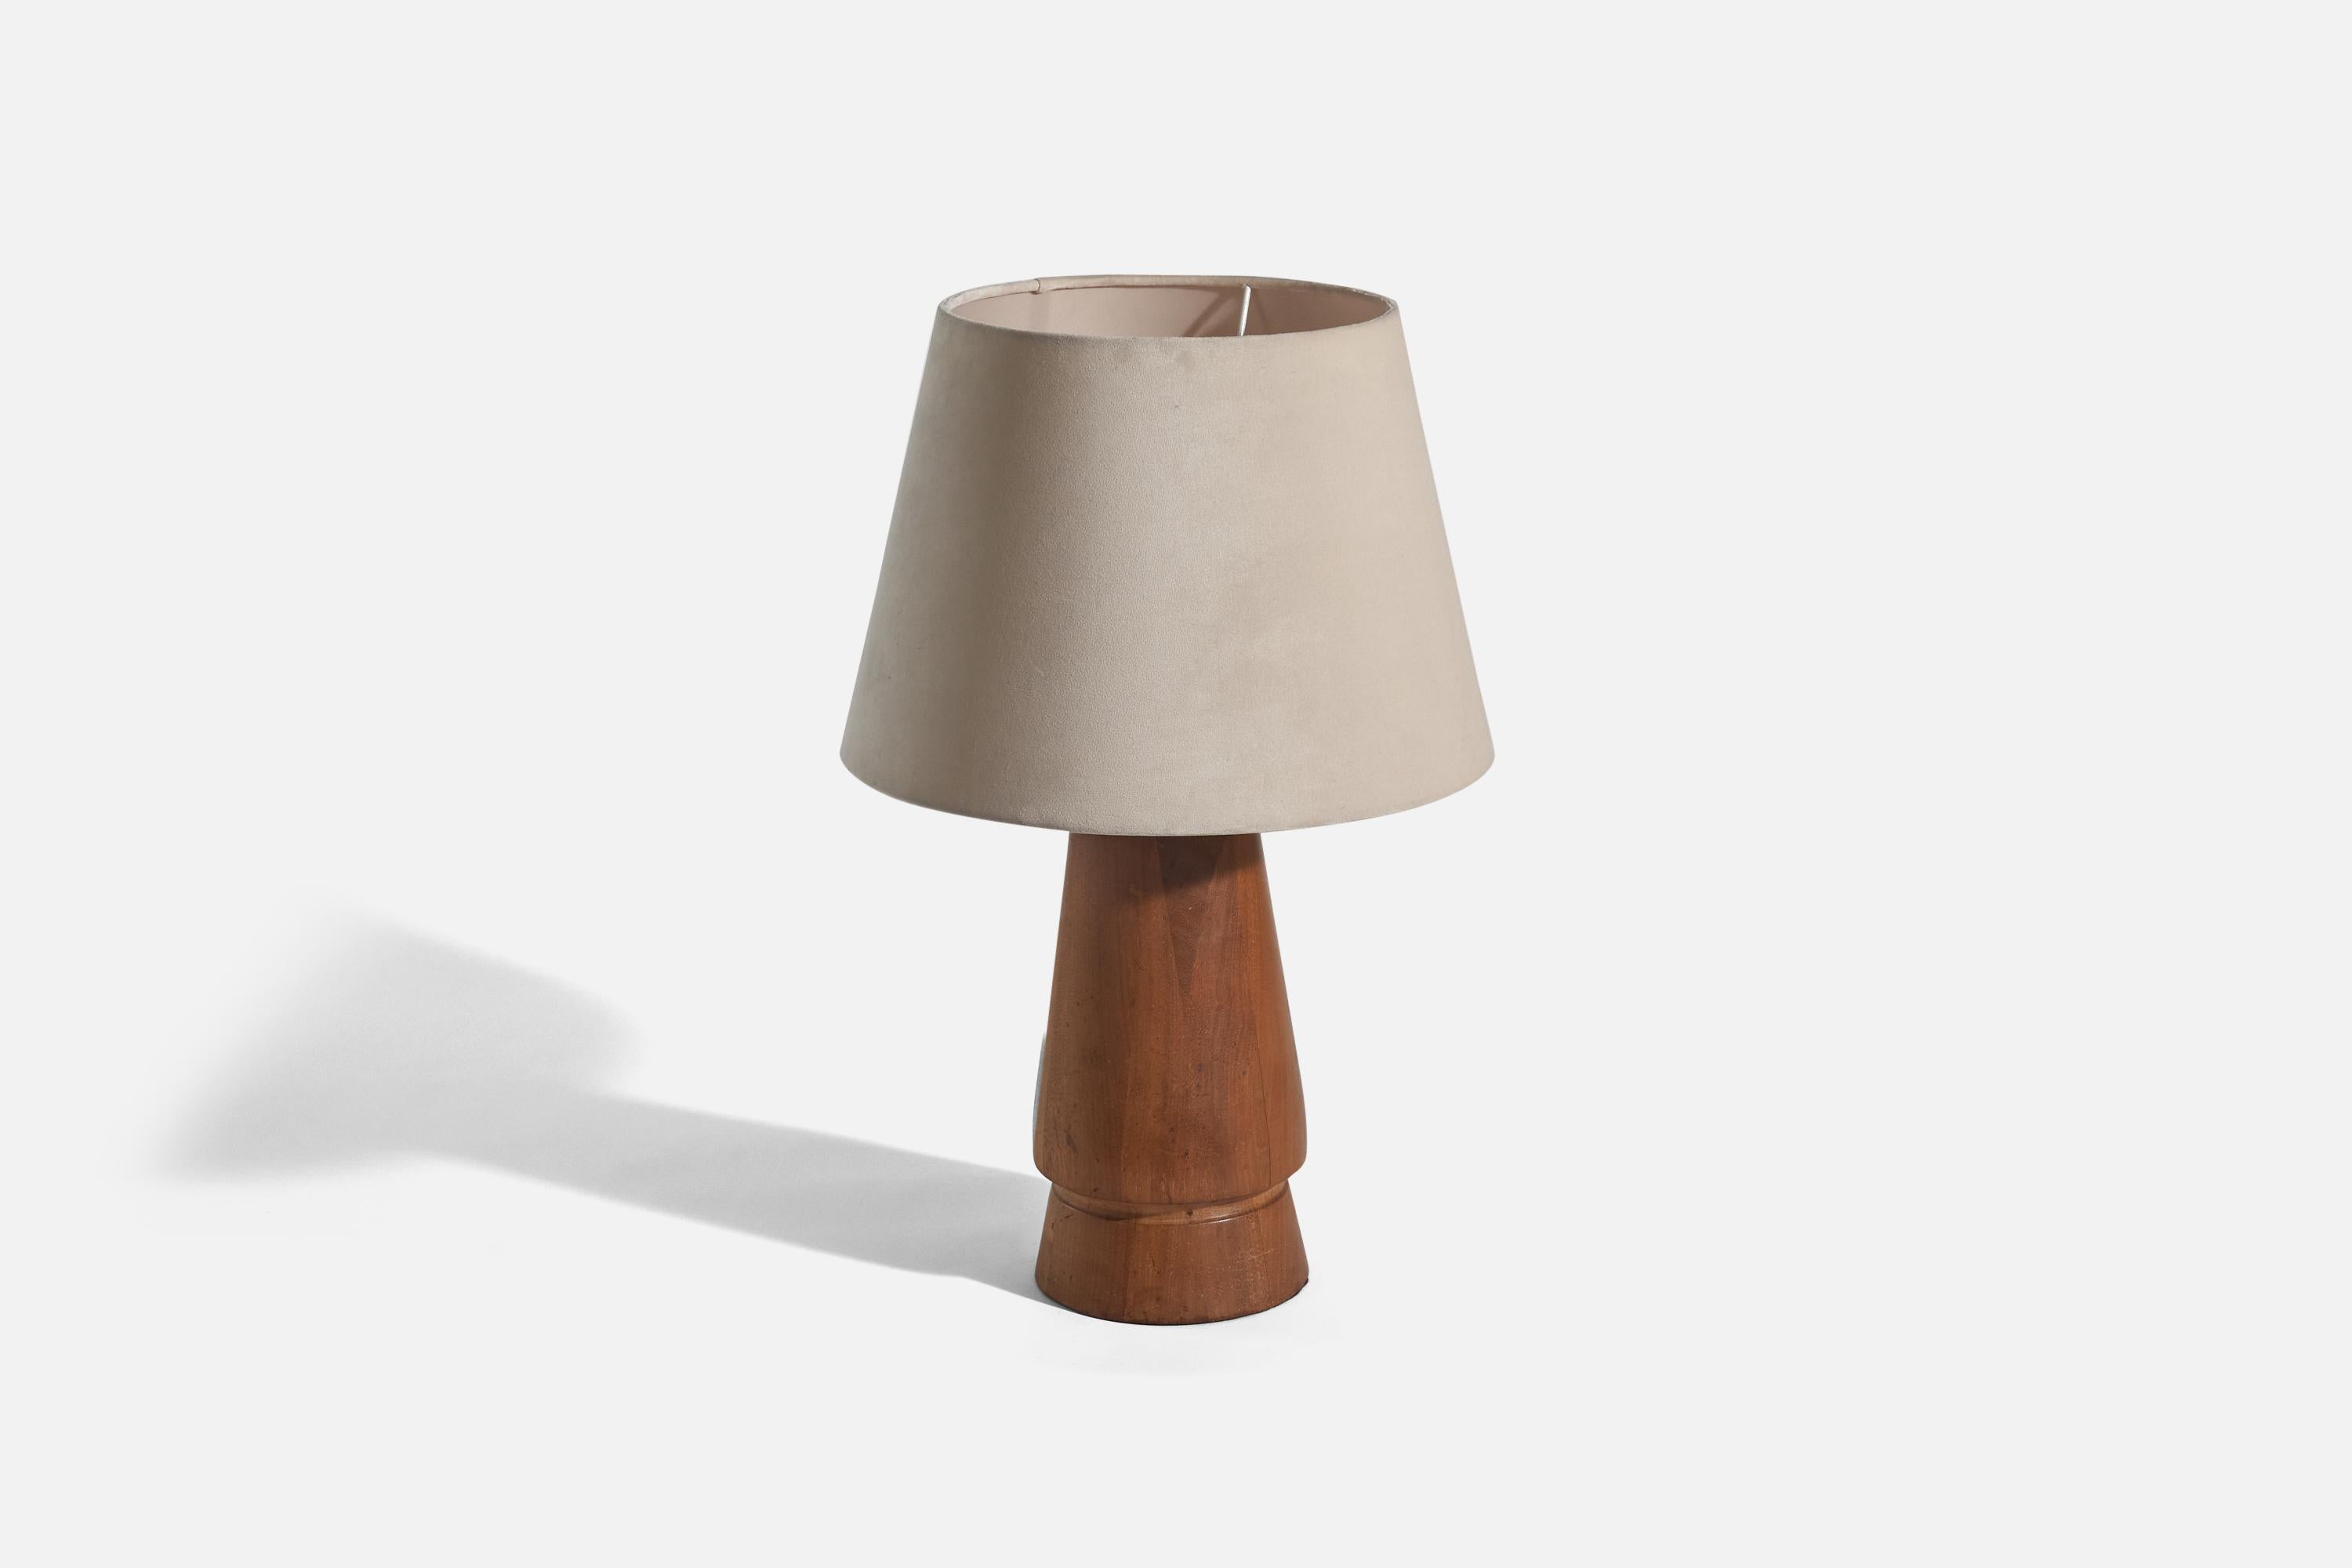 A wooden table lamp designed and produced in Brazil, c. 1960s. 

Sold with fabric lampshade. 
Dimensions of lamp (inches) : 14.62 x 6 x 6 (height x width x depth)
Dimensions of shade (inches) : 9.5 x 13.87 x 9.75 (top diameter x bottom diameter